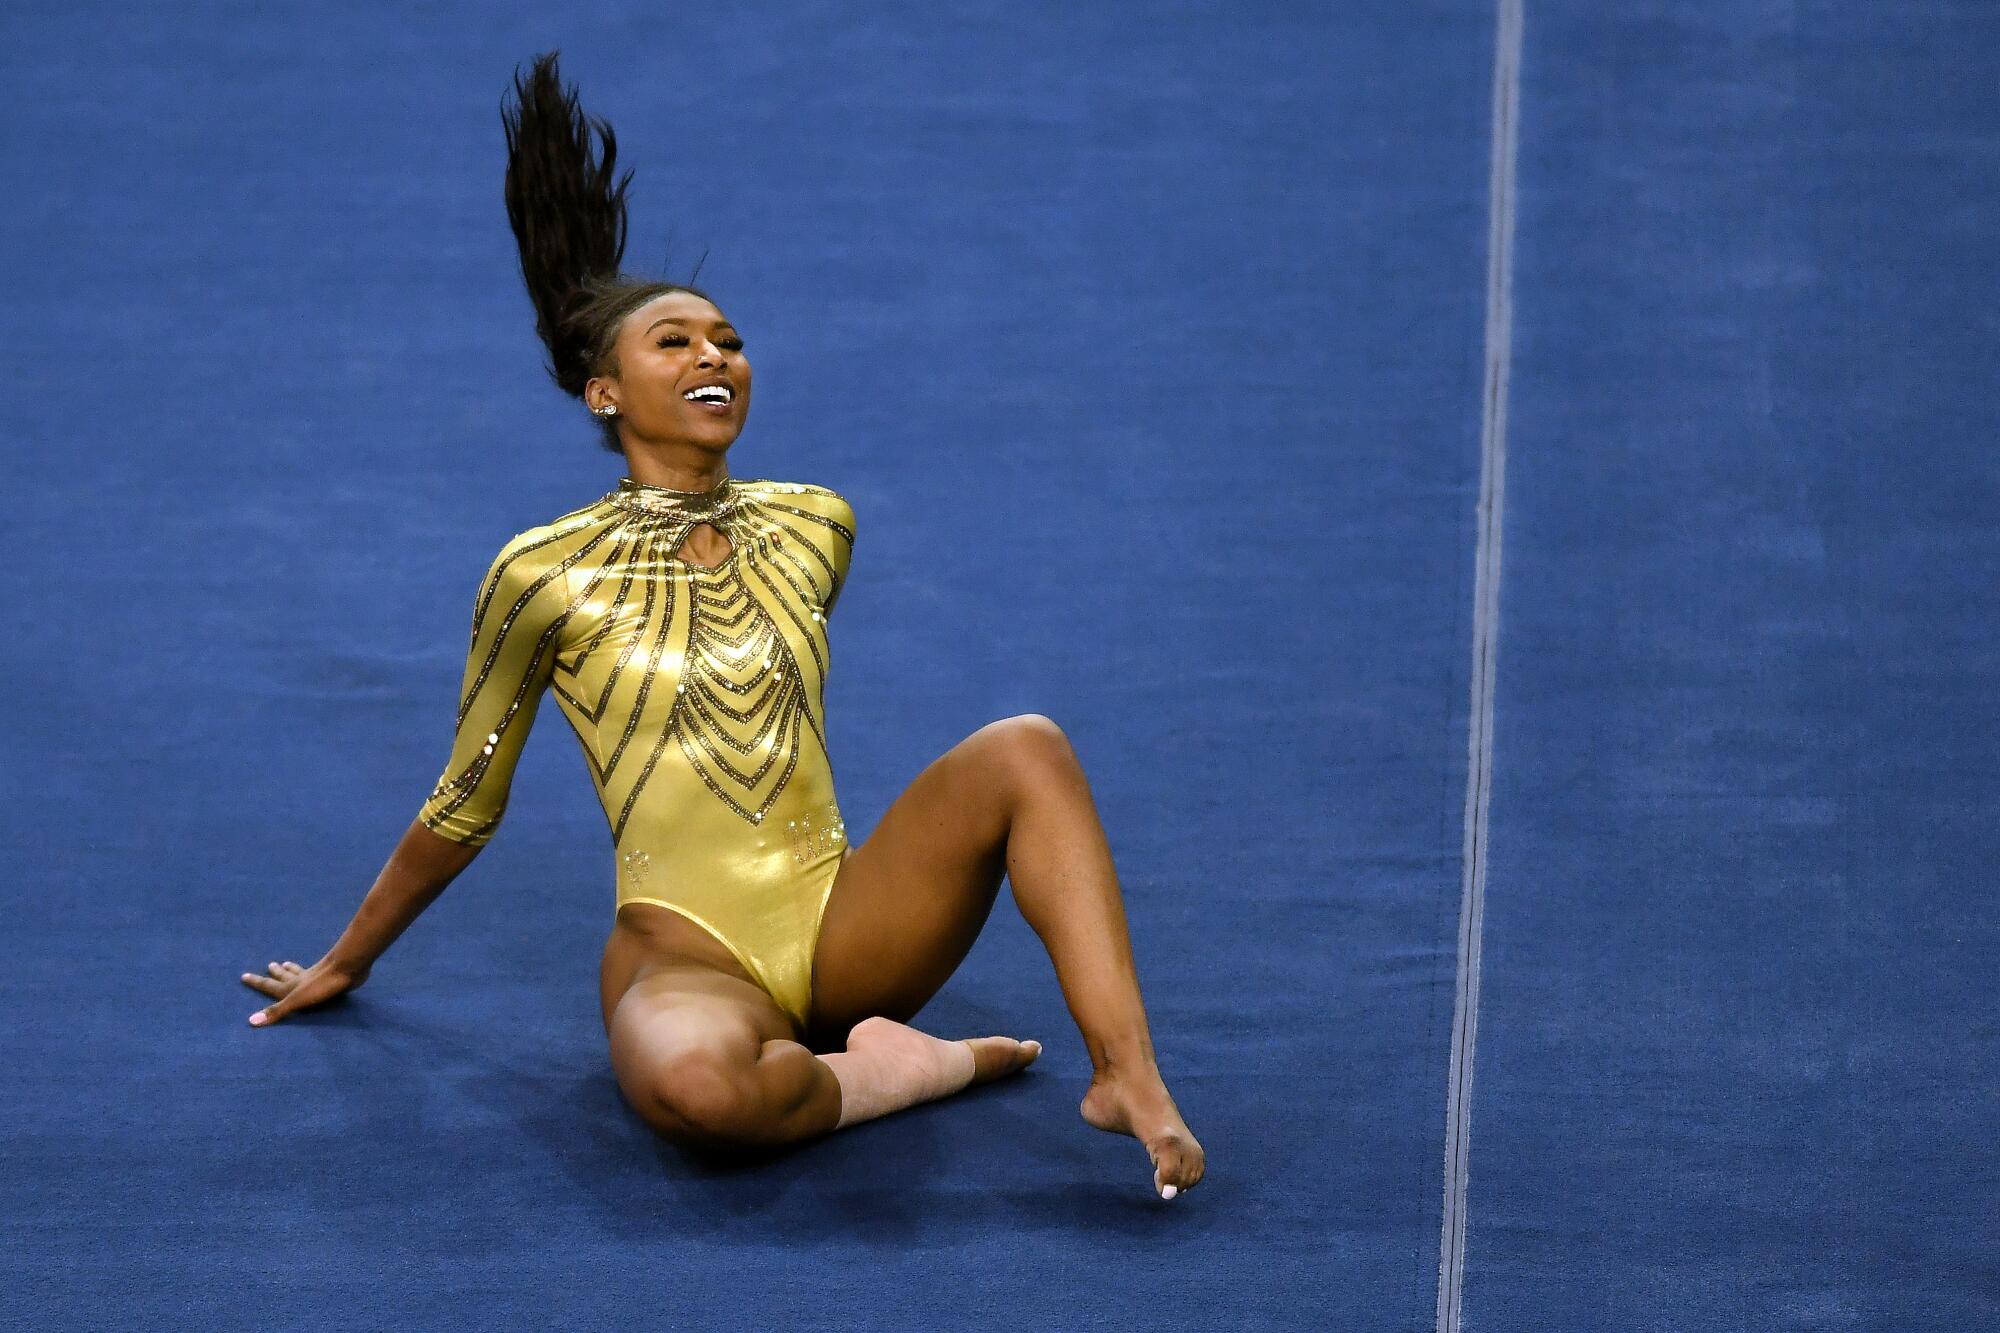 The 5 BEST FEMALE Tumbling passes Of All Time! 